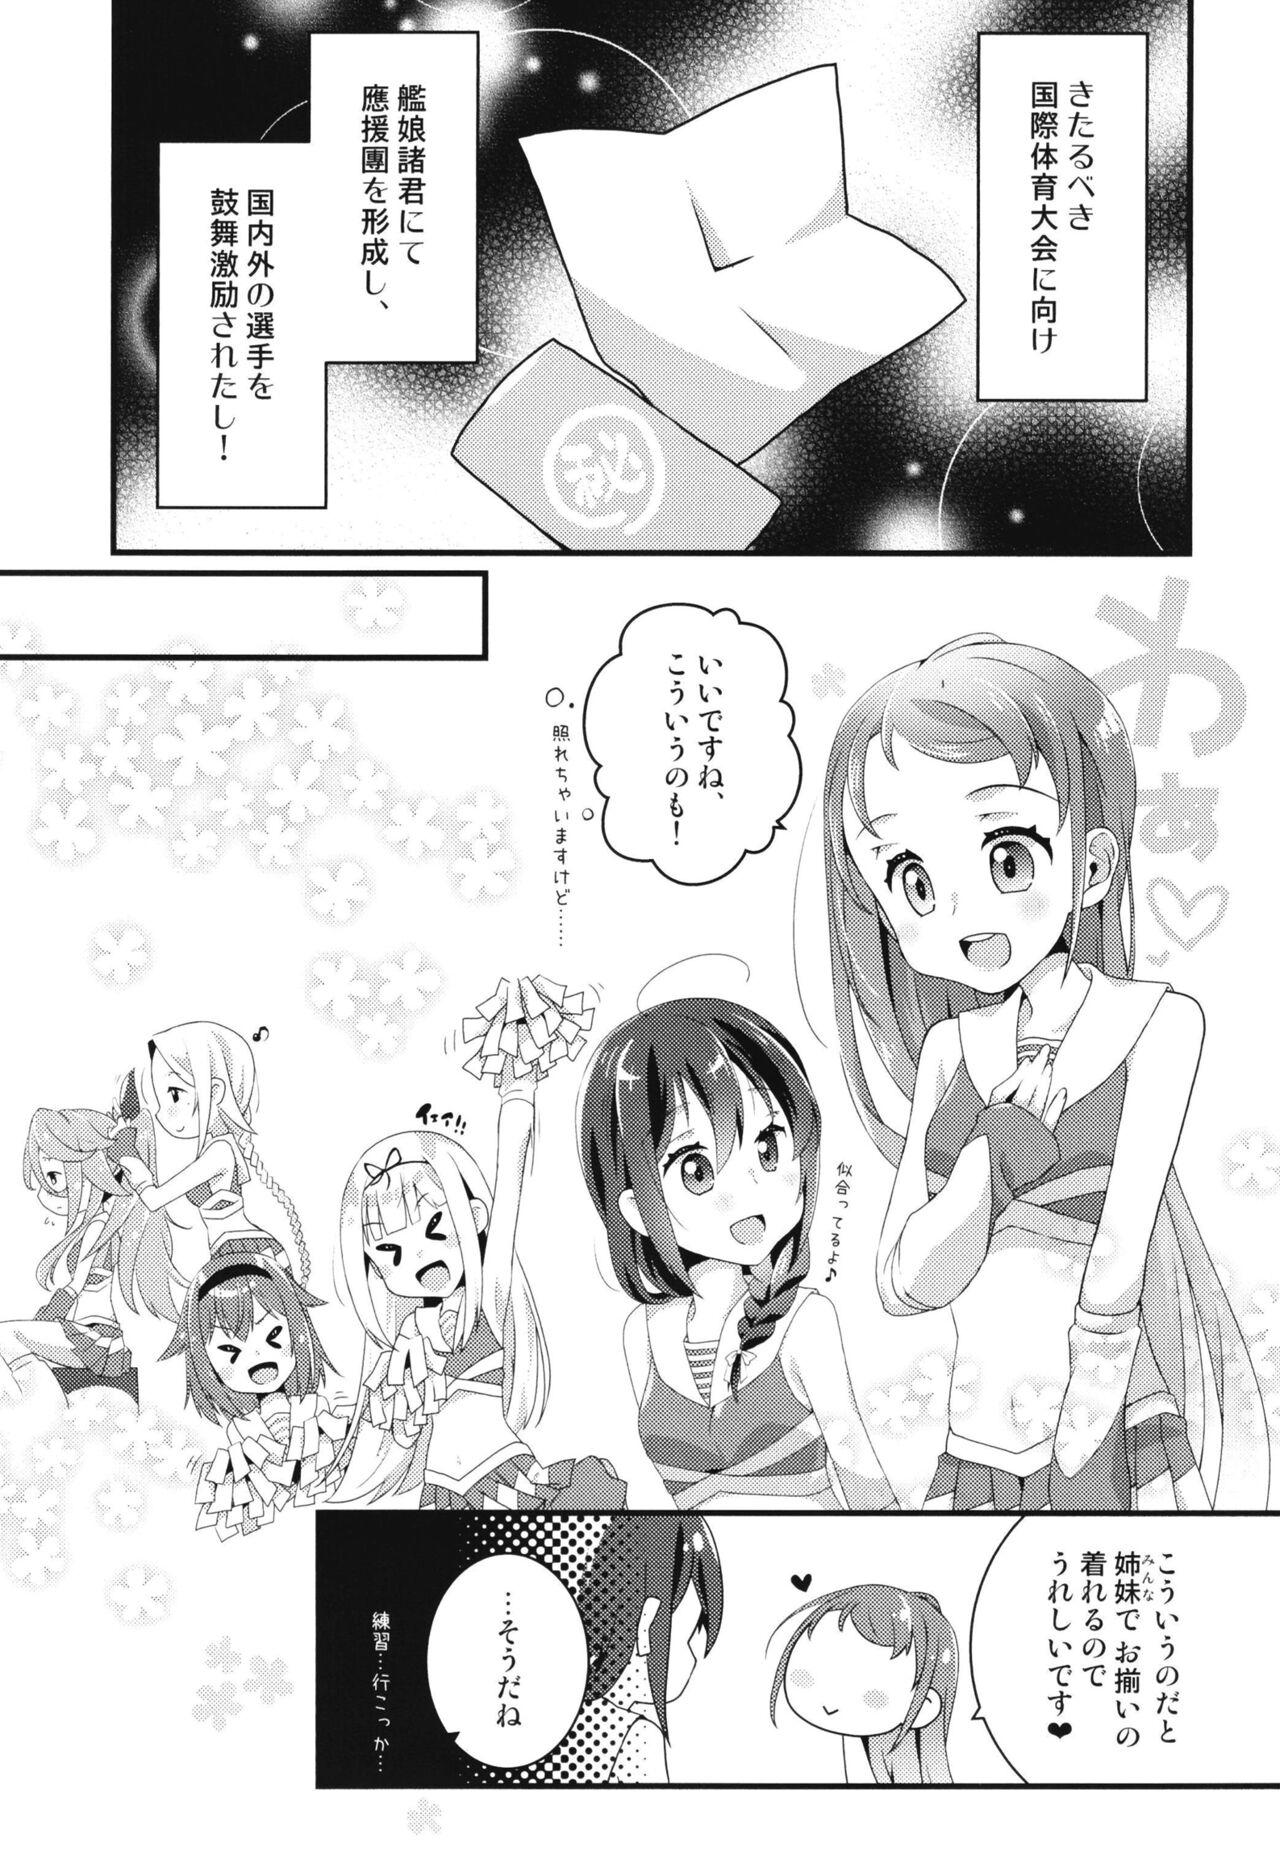 Forwomen Yah! Cheer! yeah! - Kantai collection Fist - Page 3